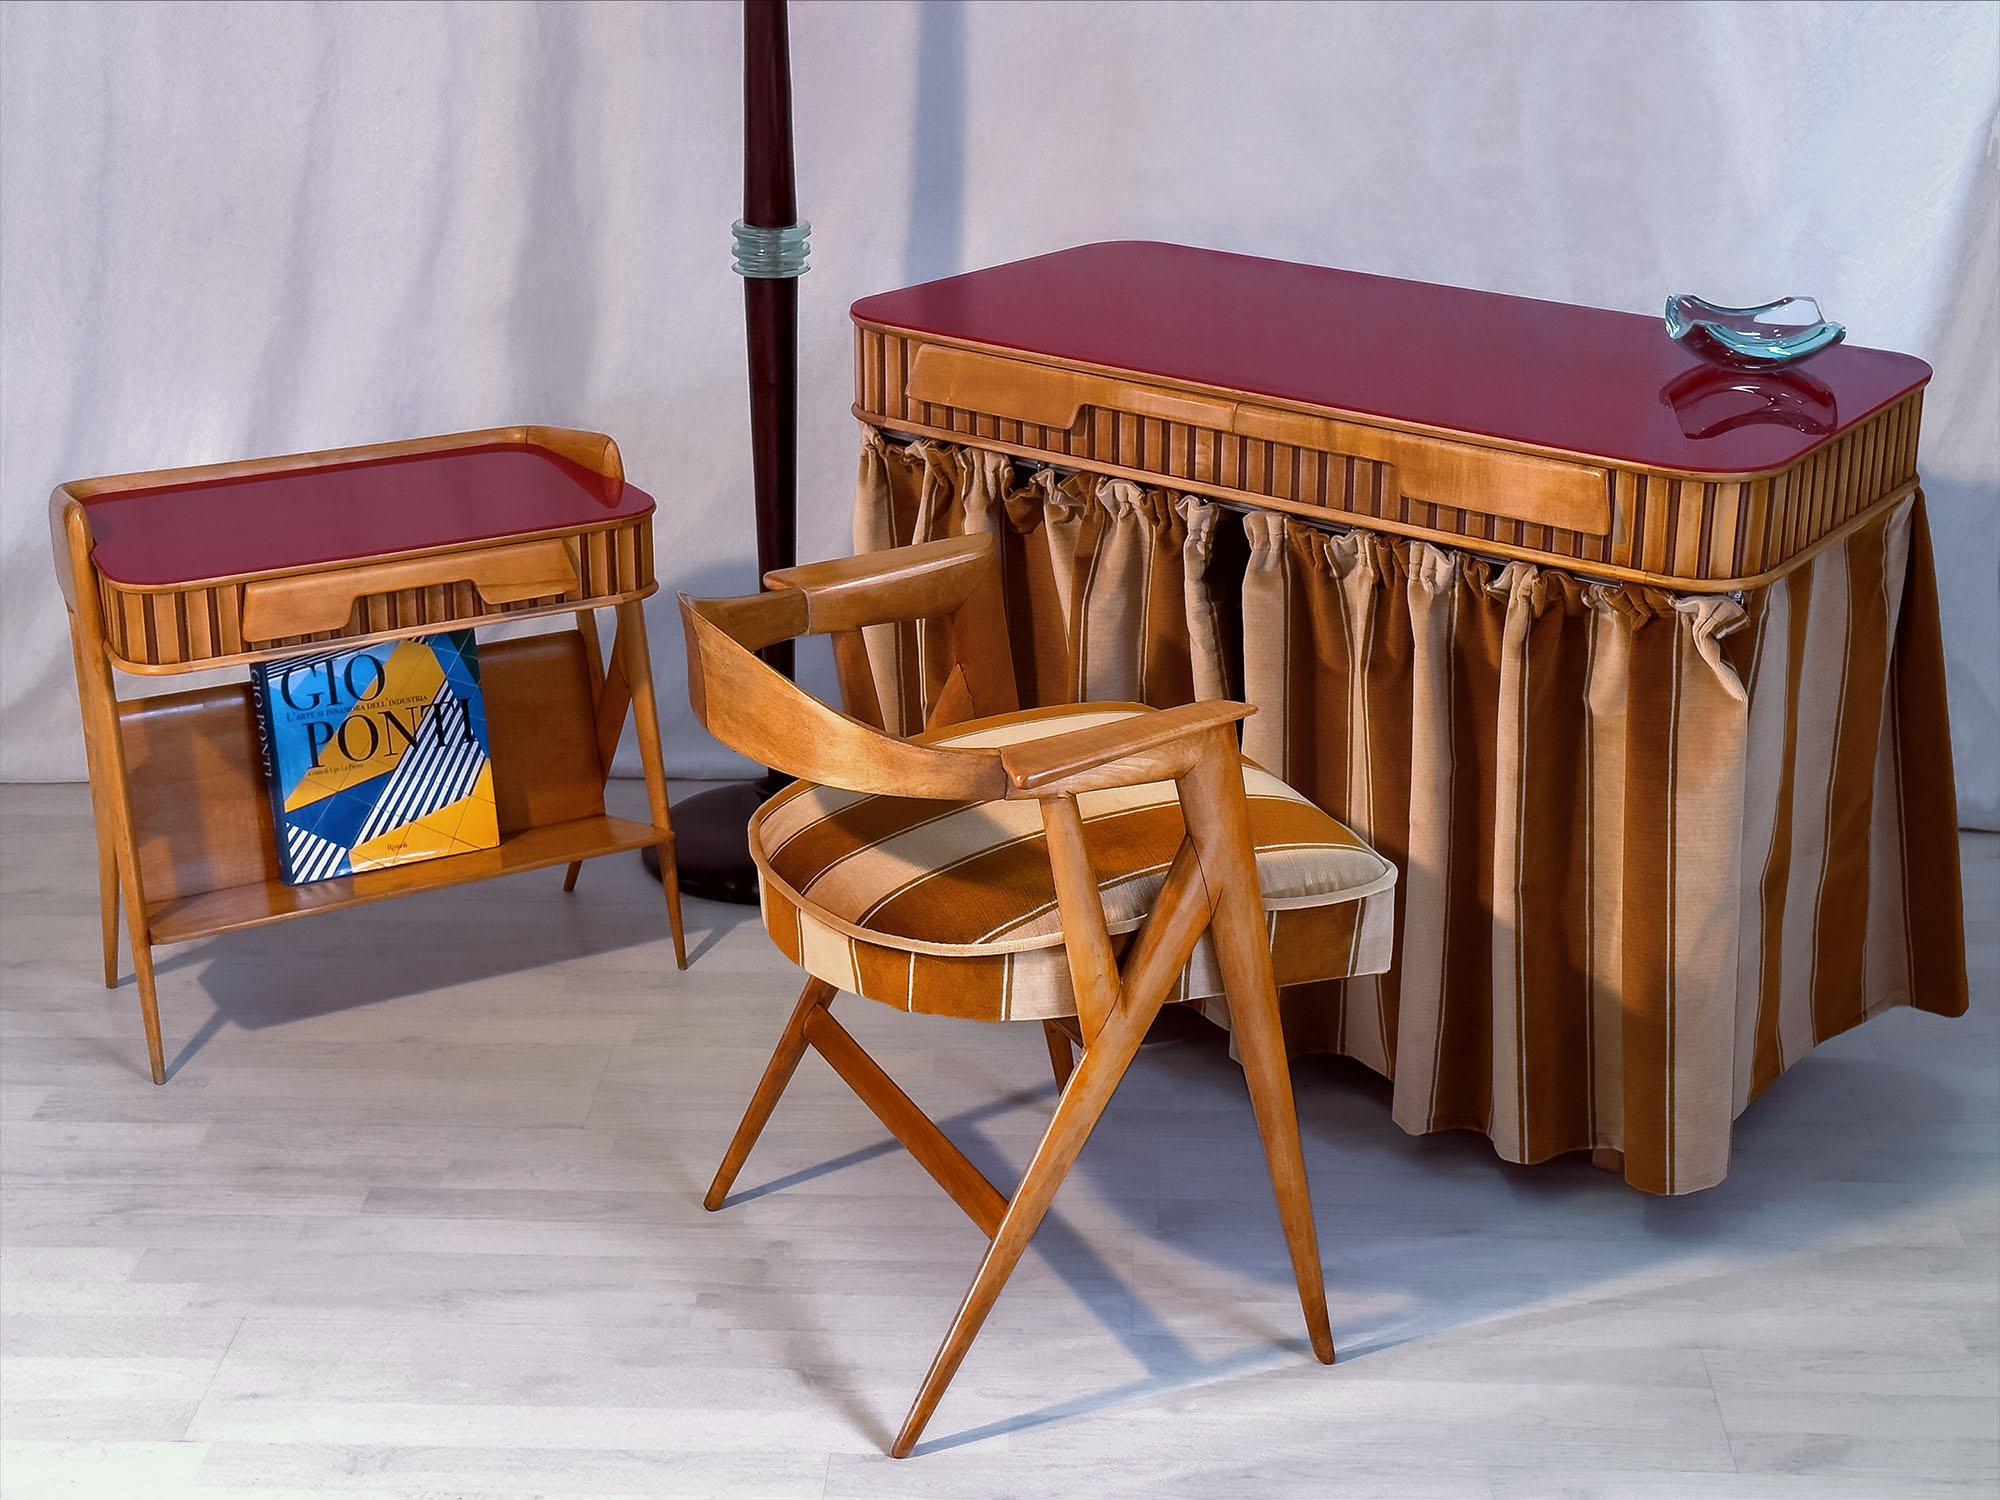 Elevate your next bedroom project with this rare and stunning 1950s Bedroom set.
A small masterpiece so well designed by Vittorio Dassi most likely four-handed together Gio Ponti, with whom he worked for many years.
It’s truly example of the finest